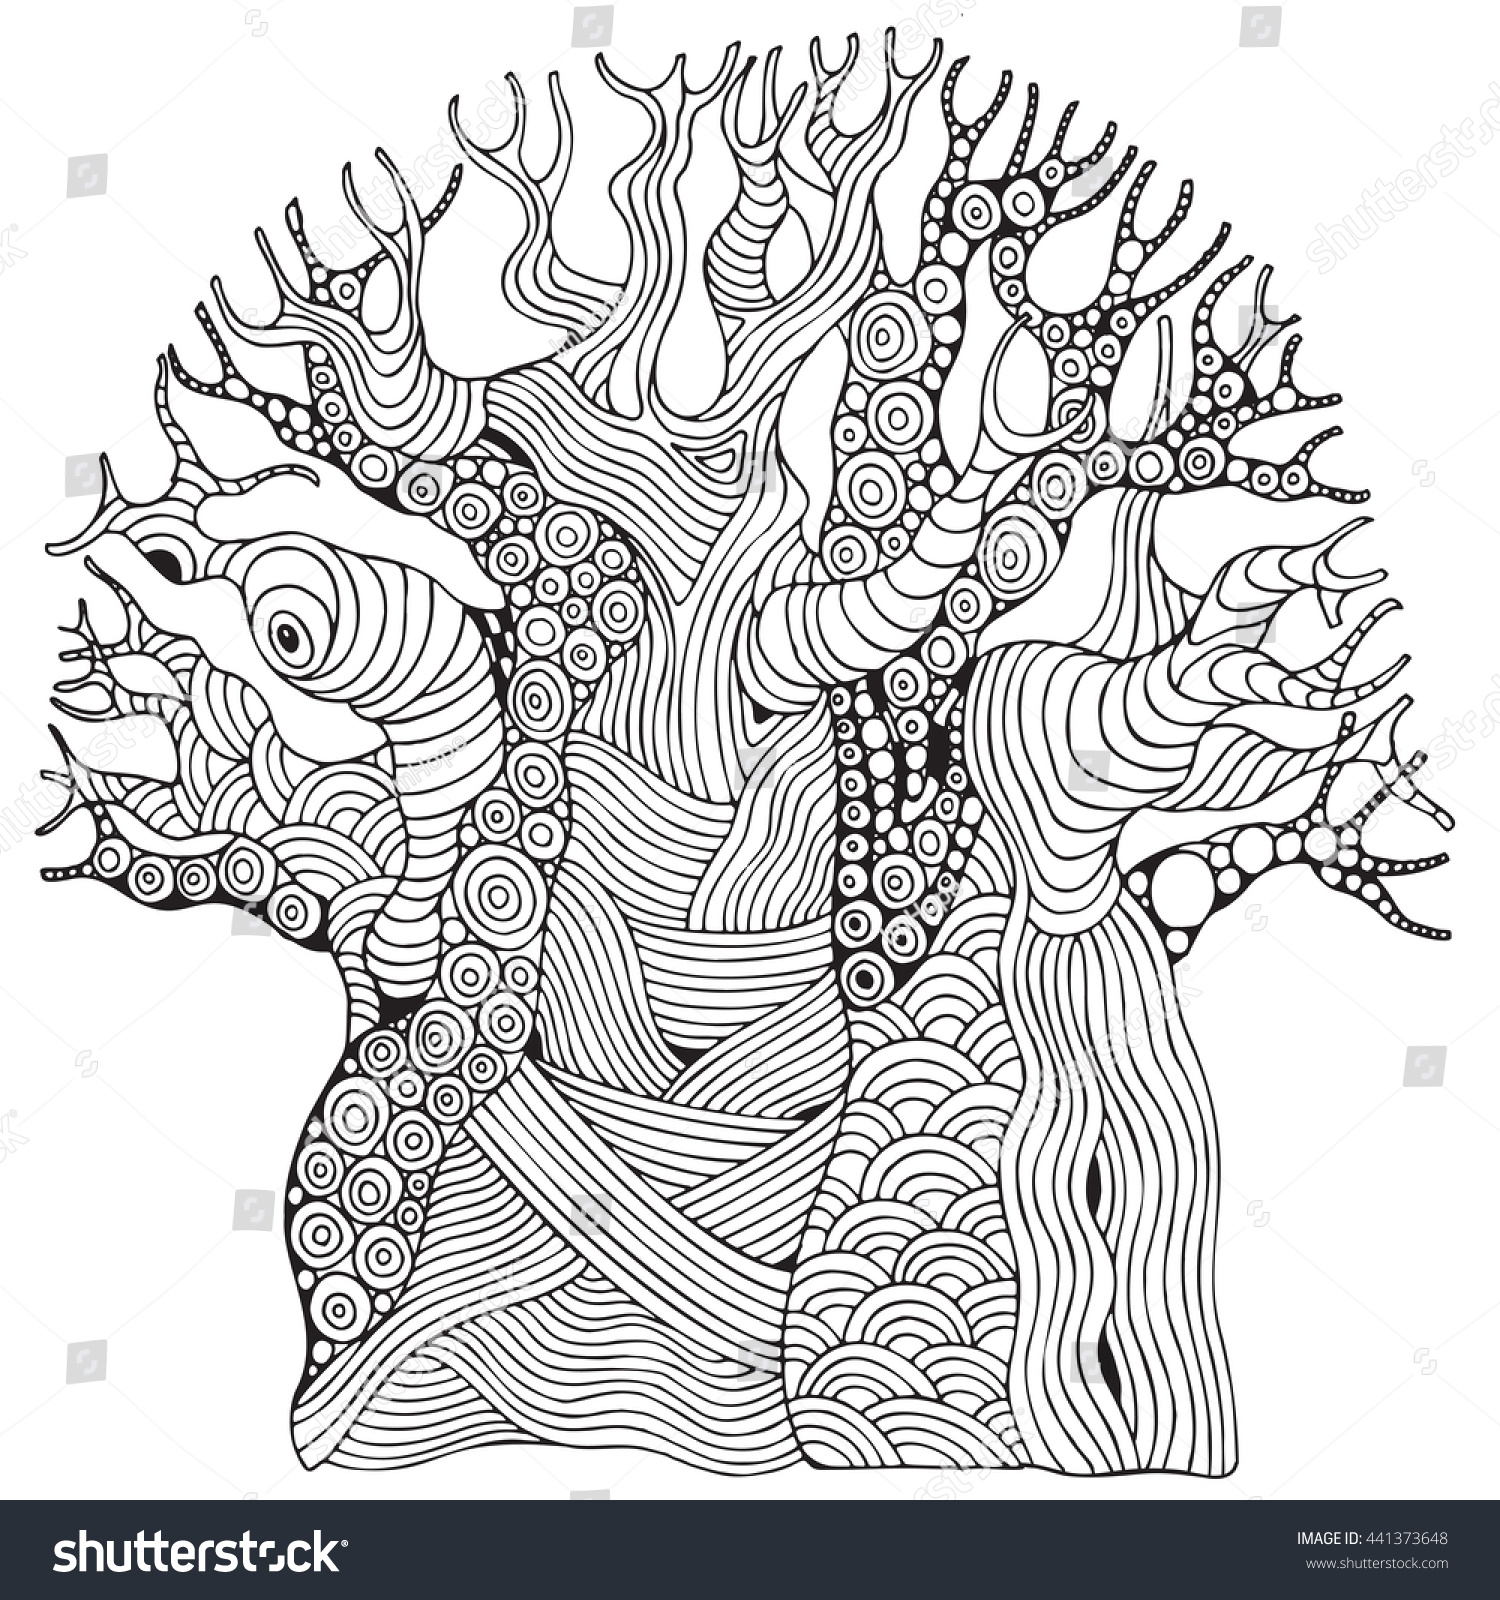 SVG of Baobab tree. African tree. Coloring book page for adult and children. Zentangle style. Black and white, monochrome illustration. svg